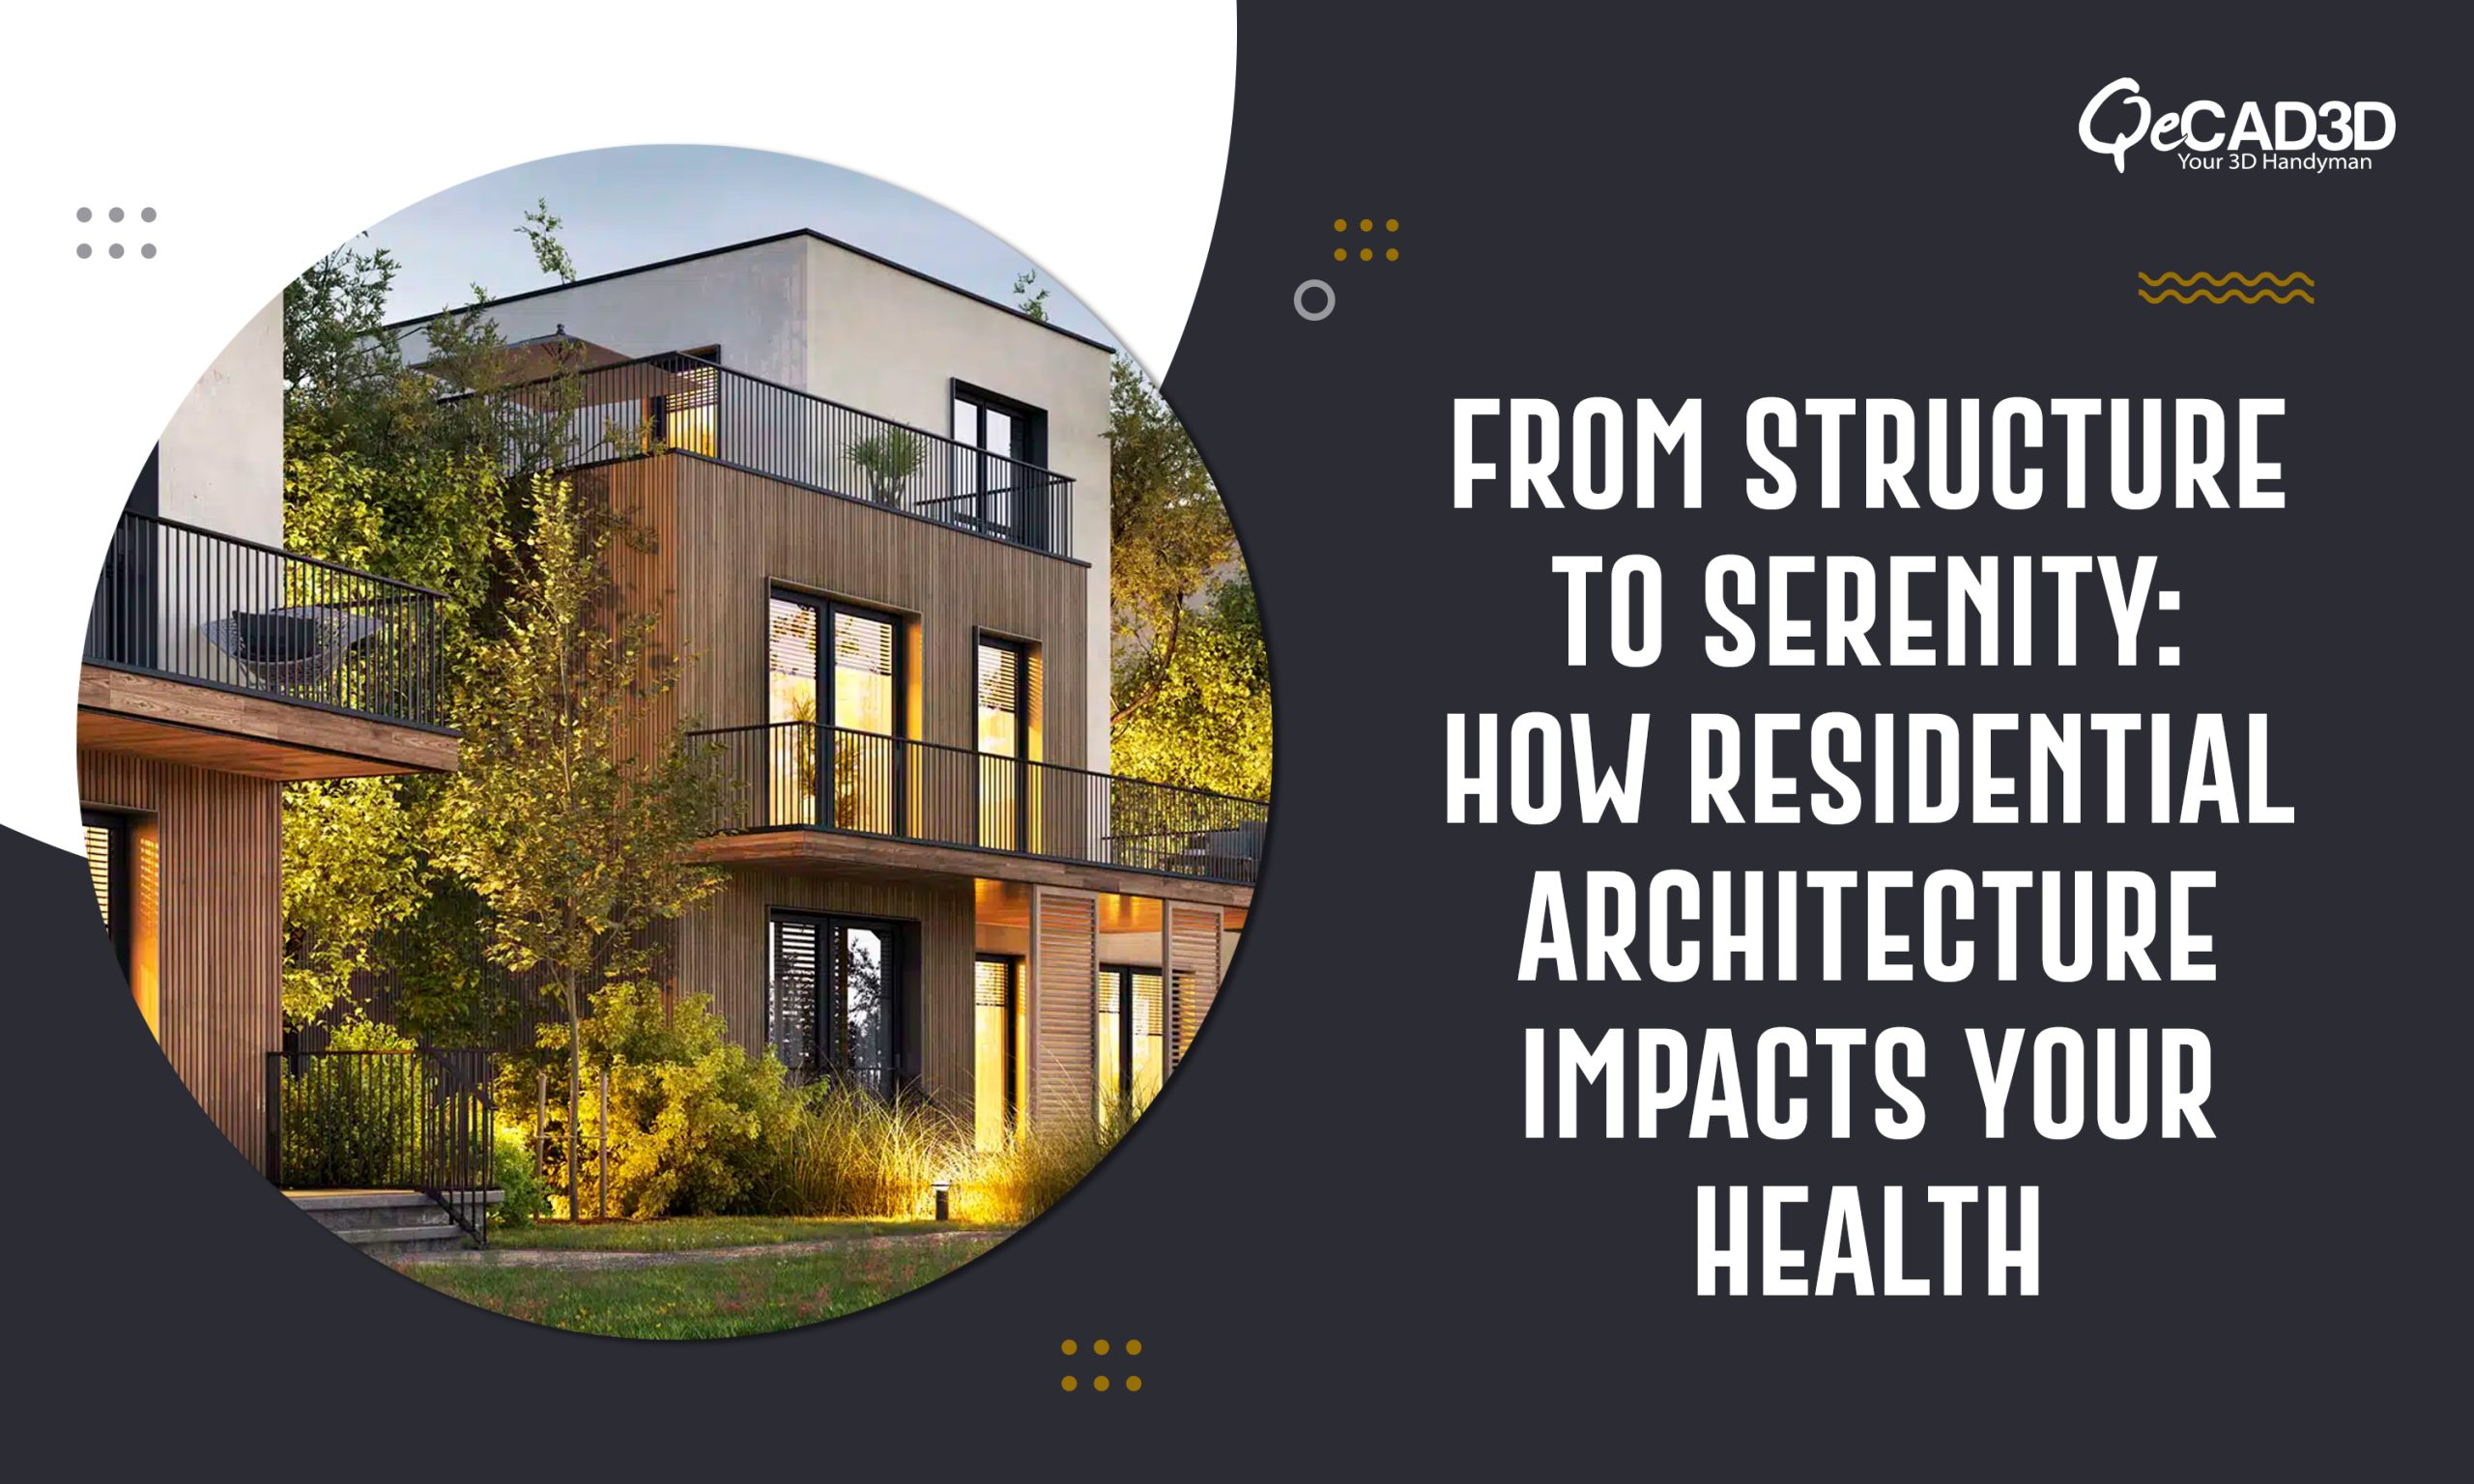 From Structure to Serenity: How Residential Architecture Impacts Your Health